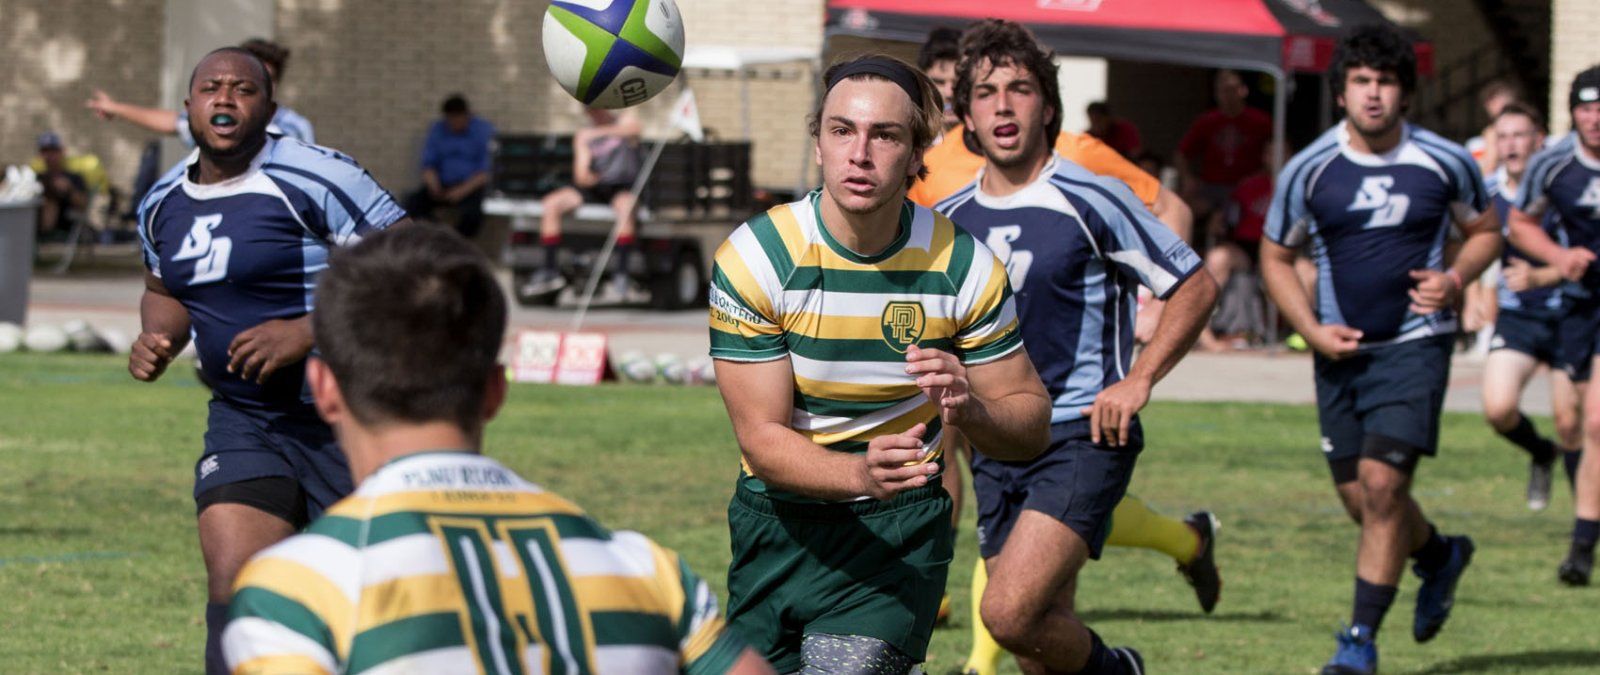 PLNU's rugby team competes against the University of San Diego in a local tournament.